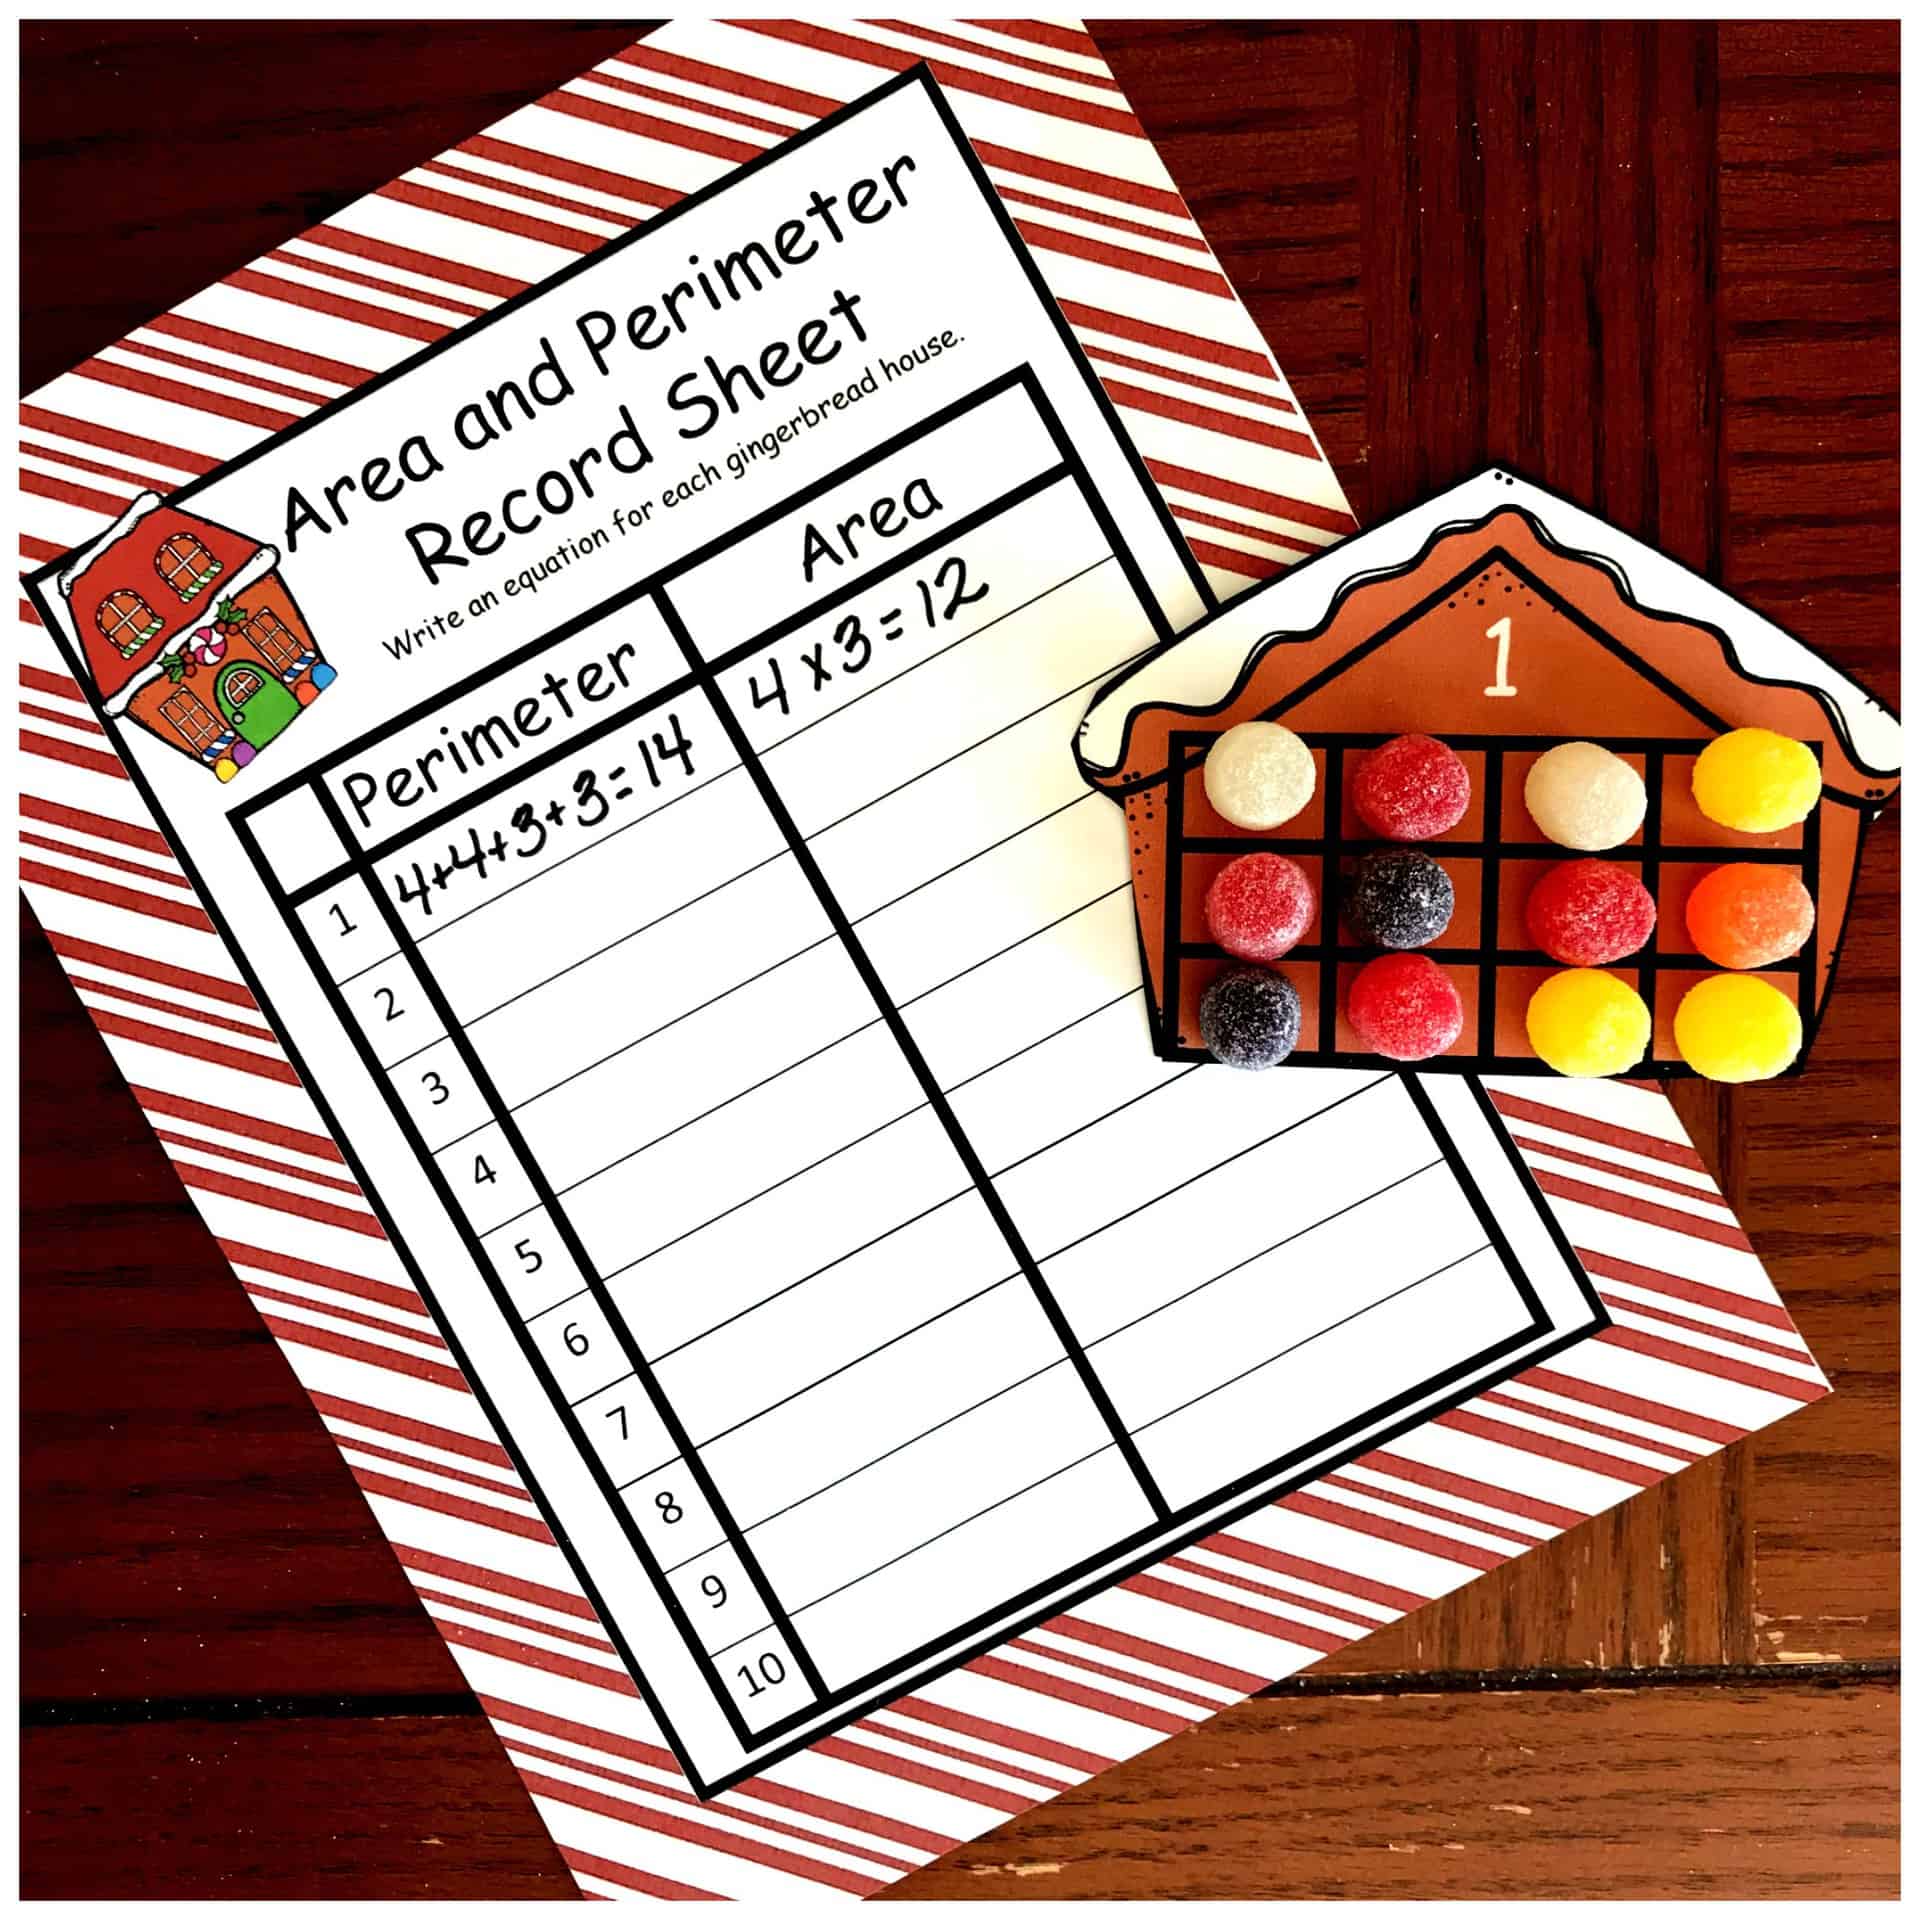 Here’s A Free Christmas Themed Area and Perimeter Activity